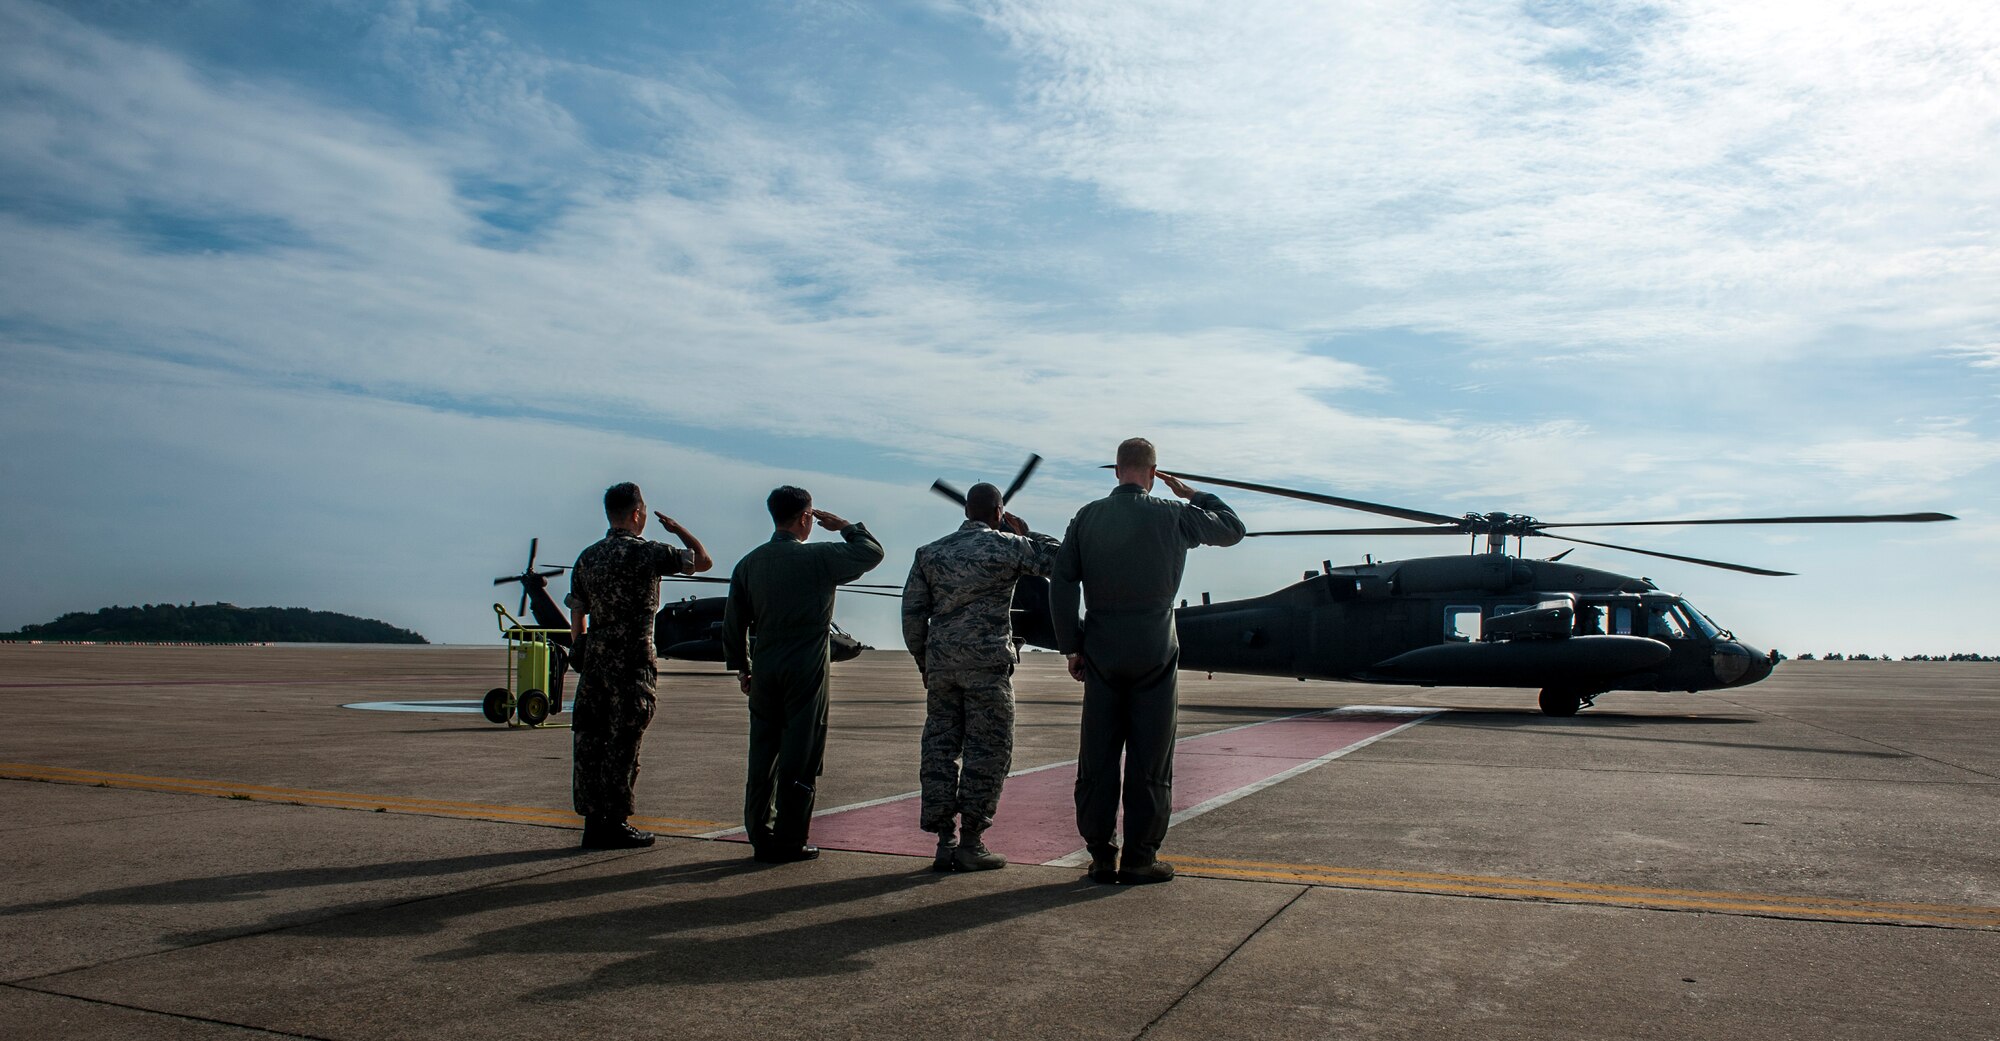 U.S. Air Force and Republic of Korea Air Force service leadership at Kunsan Air Base, Republic of Korea, render a salute as U.S. Army Gen. Vincent K. Brooks’s U.S. Army UH-60 prepares to depart the base June 22, 2017.  During his visit, Brooks toured multiple squadrons around the installation to familiarize himself with the capabilities which support the overall USFK mission and to recognize and talk with outstanding performers throughout the base. (U.S. Air Force photo by Senior Airman Colville McFee/Released)